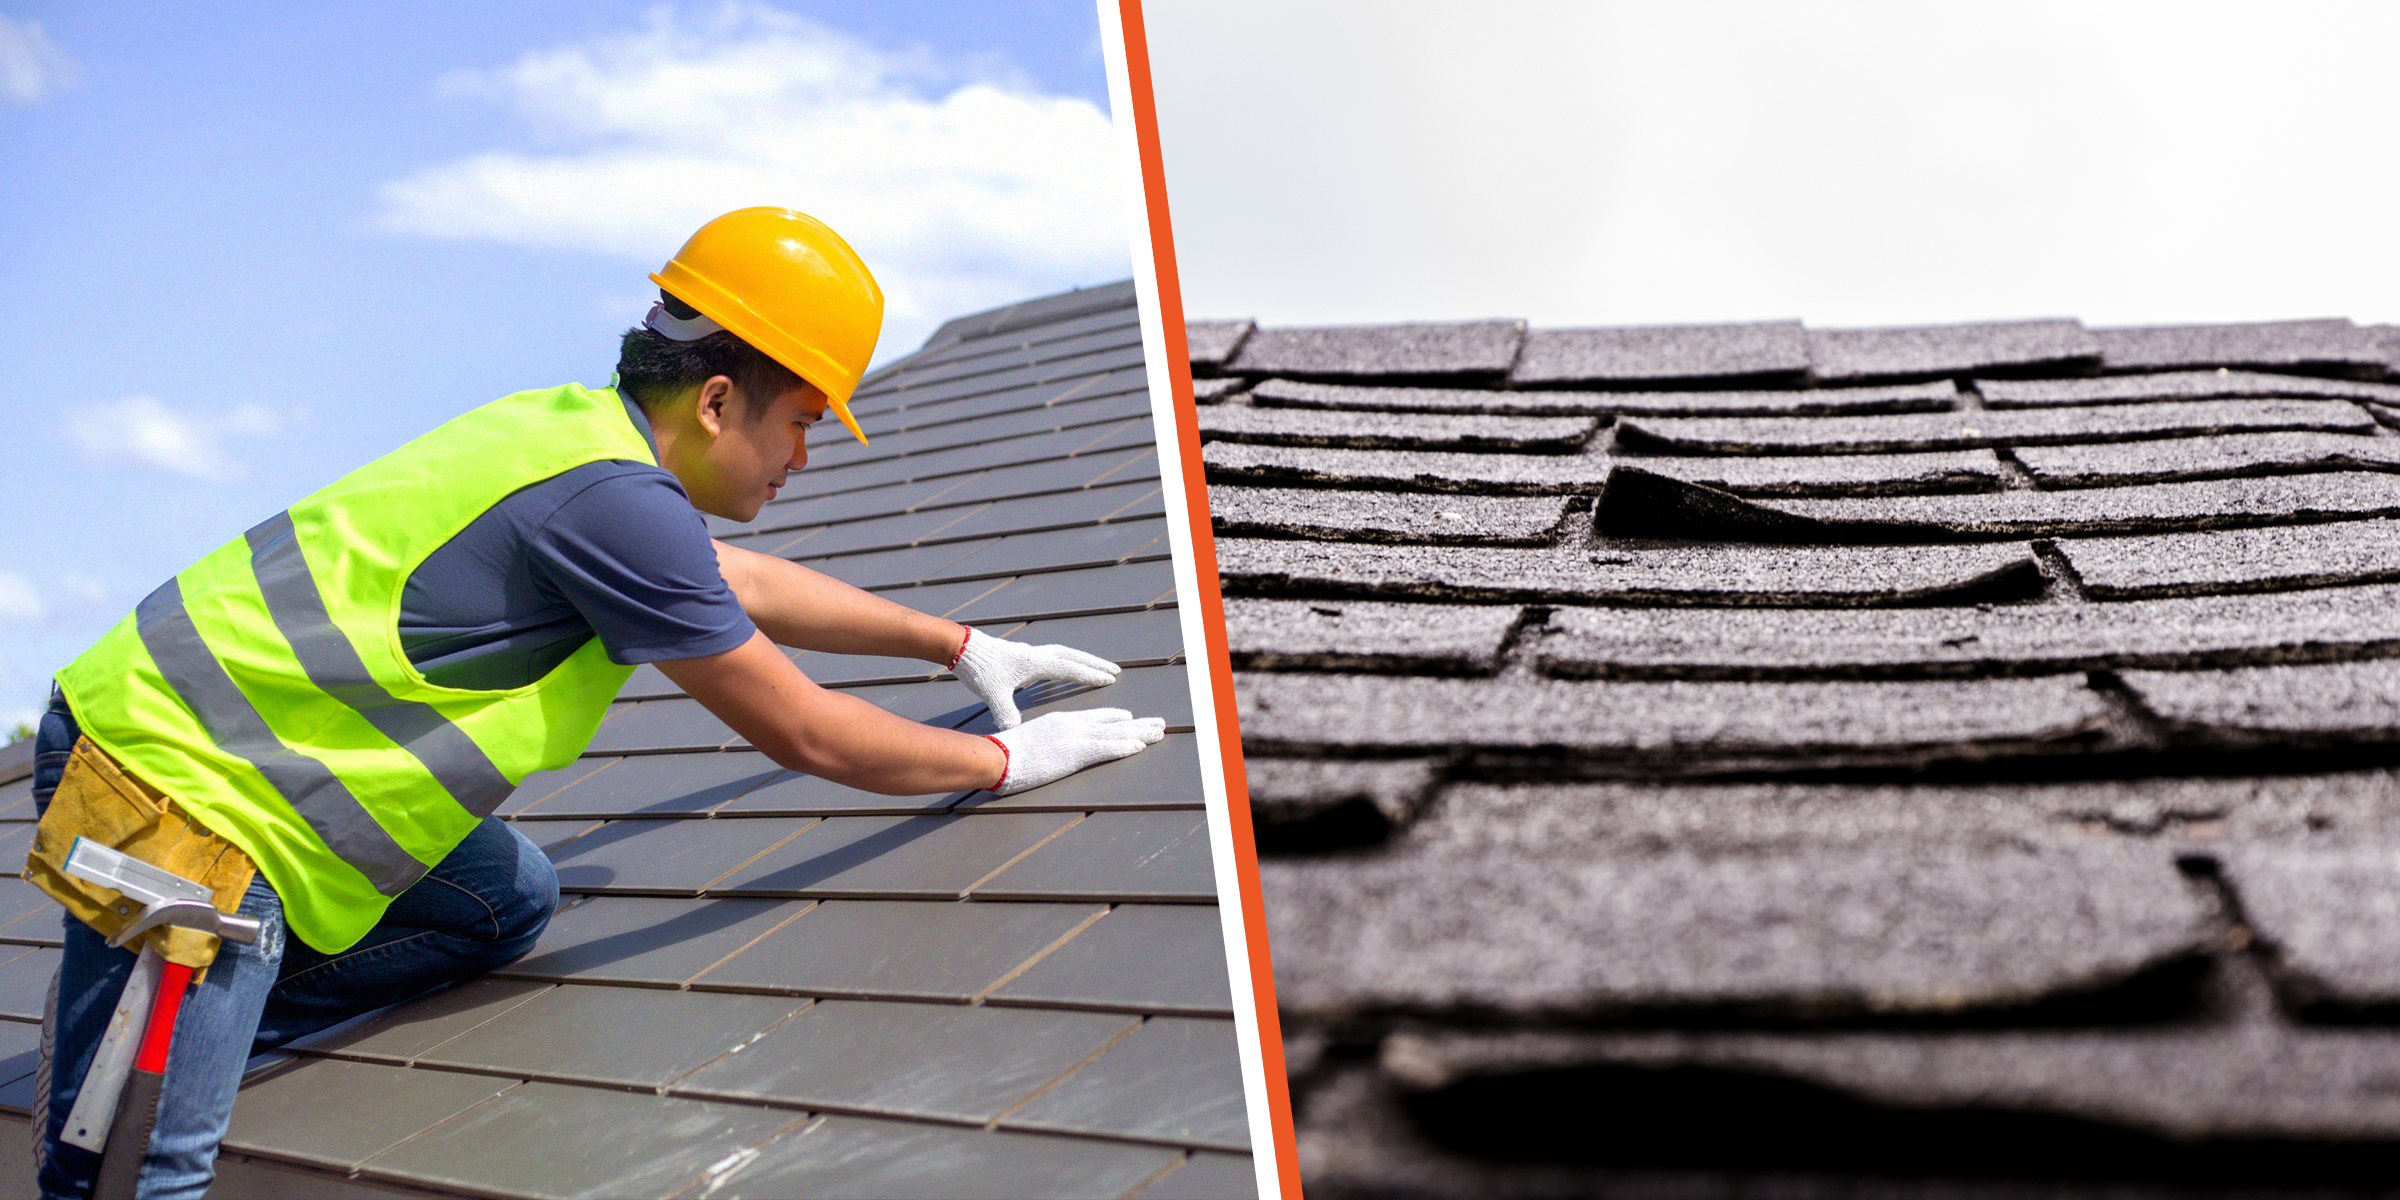 A man repairing a roof | A roof with granular loss | Source: Getty Images